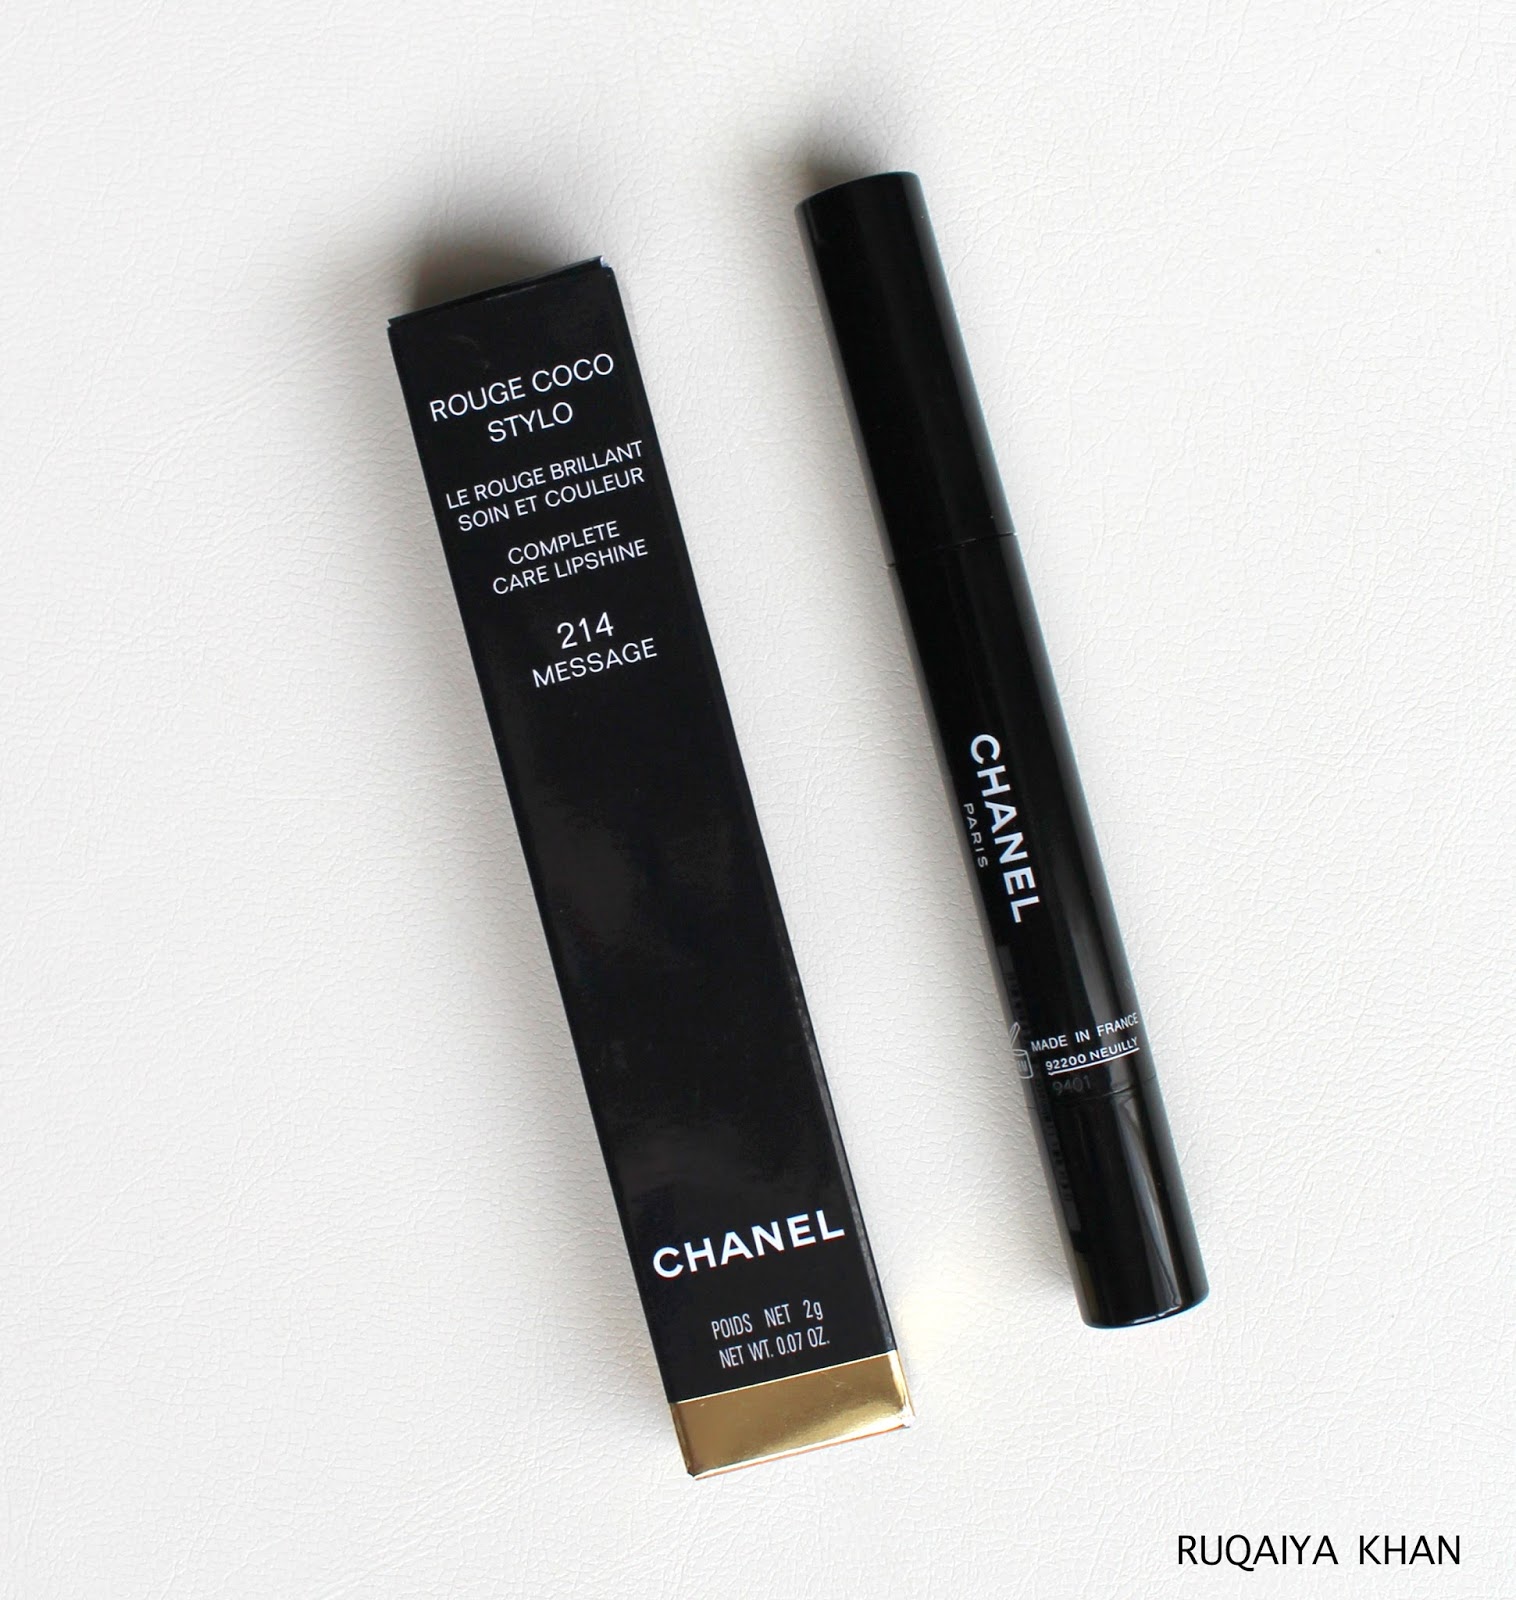 Ruqaiya Khan: CHANEL Rouge Coco Stylo in 214 Message - Review and